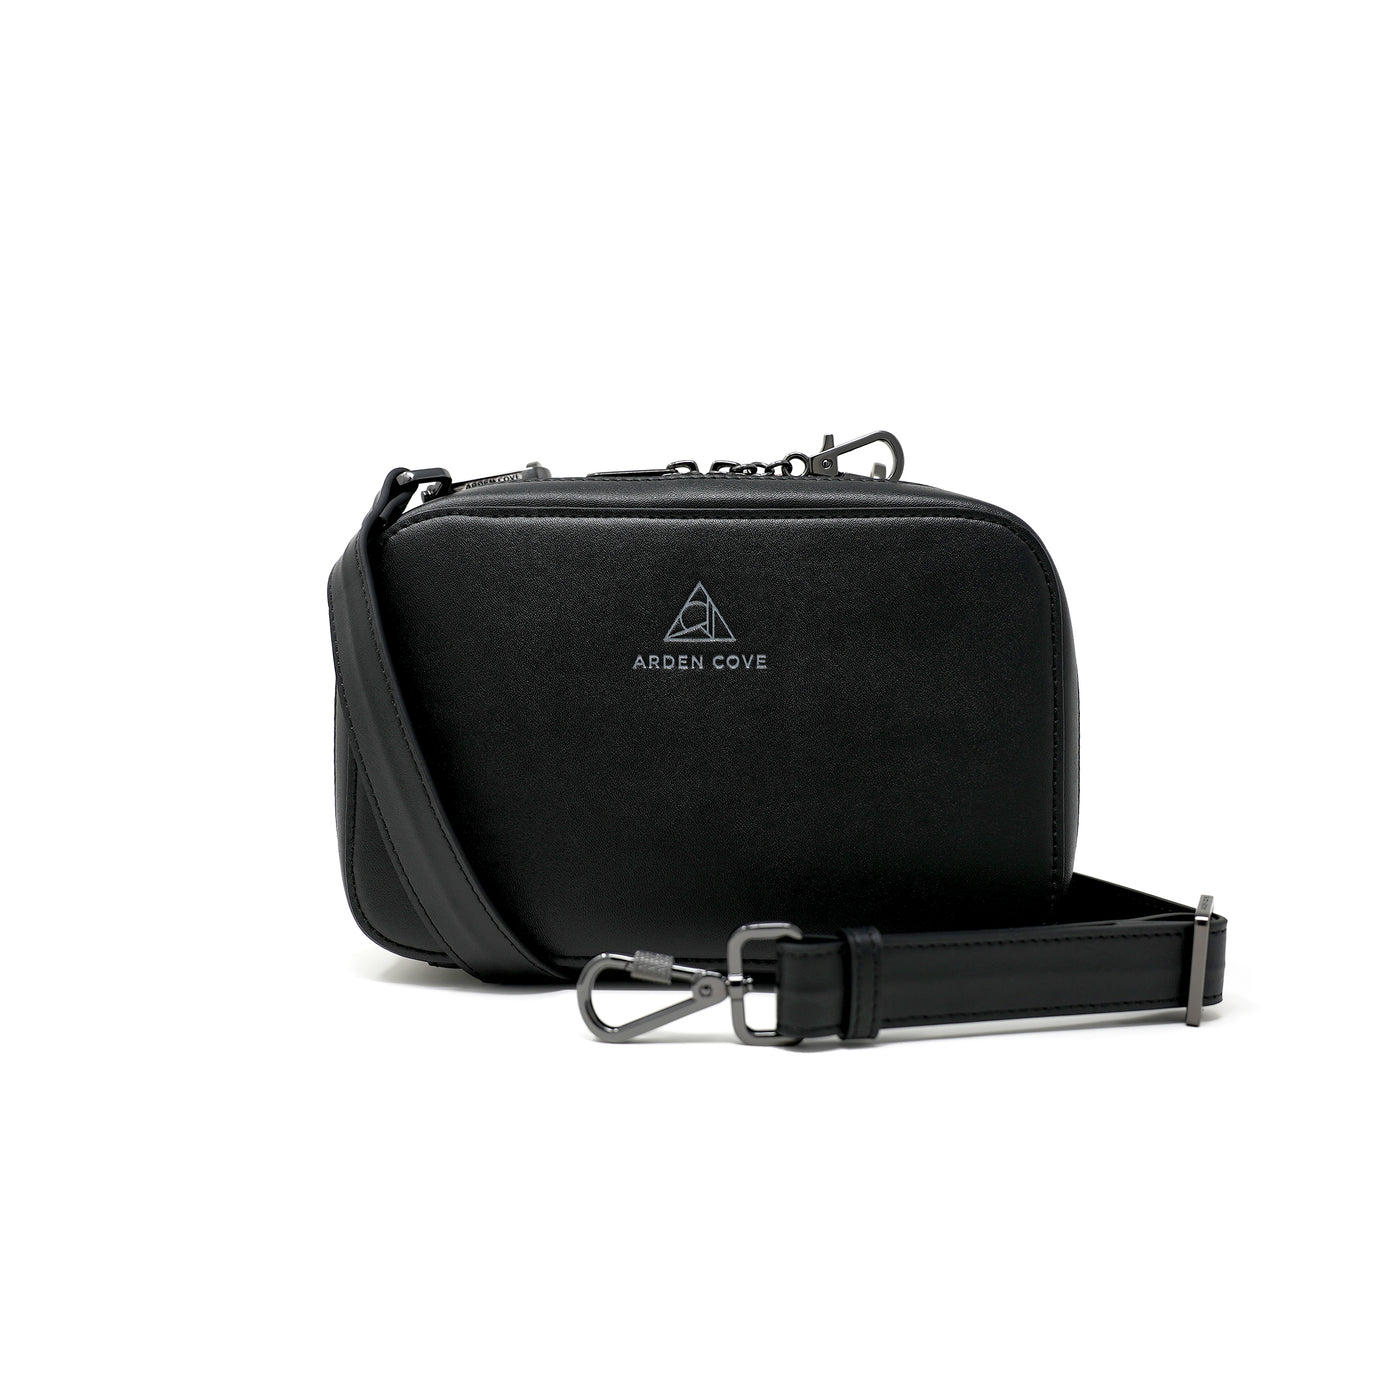 Anti-theft Water-resistant Travel Crossbody - Elise Crossbody in Black Gunmetal with slash-resistant wide faux leather & locking clasps straps - front view - Arden Cove